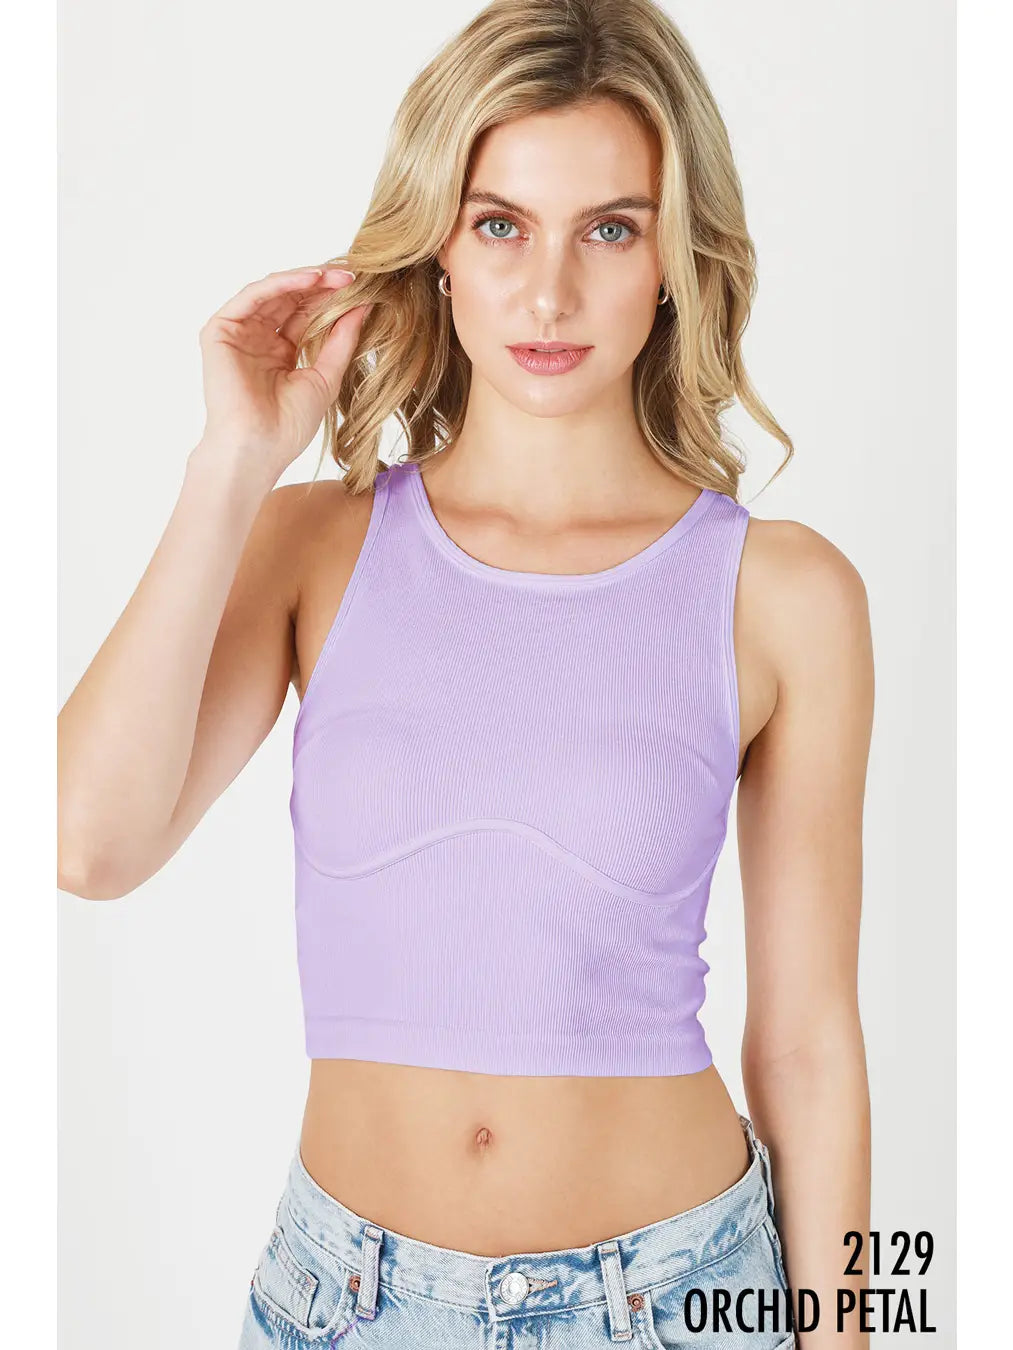 High Neck Corset Top in the color Orchid Petal